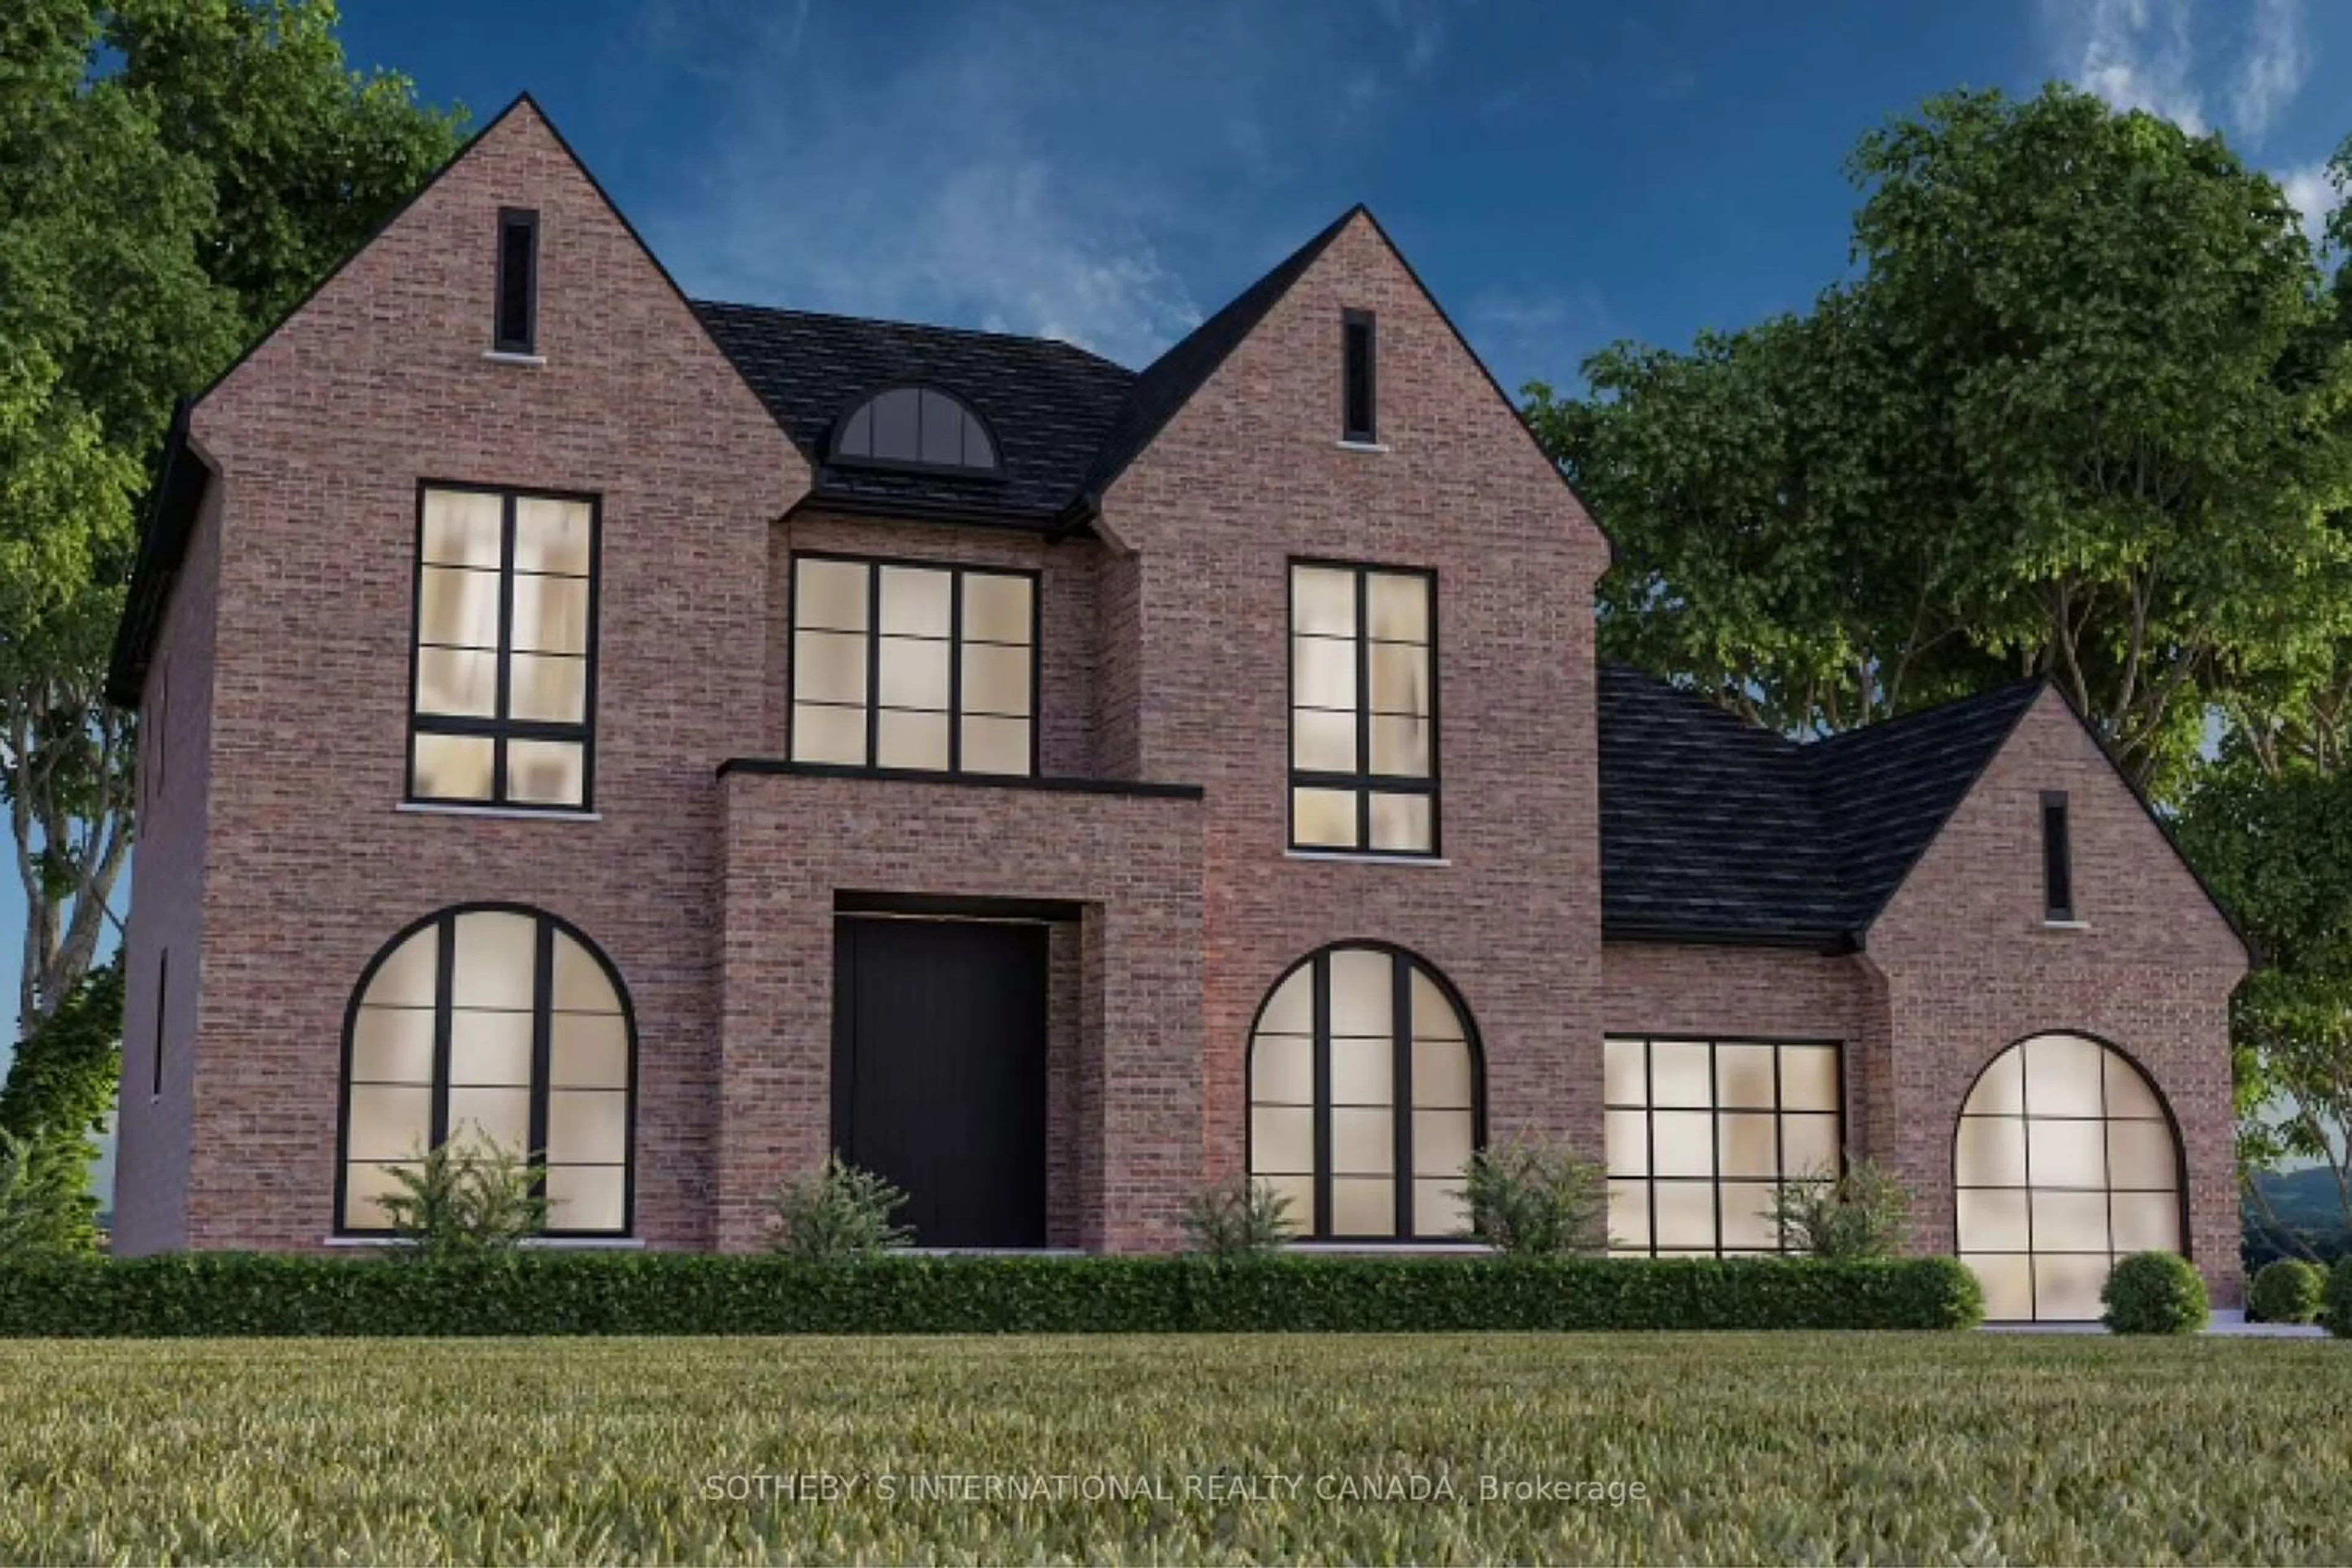 Home with brick exterior material for 2199 Robbie's Way, London Ontario N6G 0E9